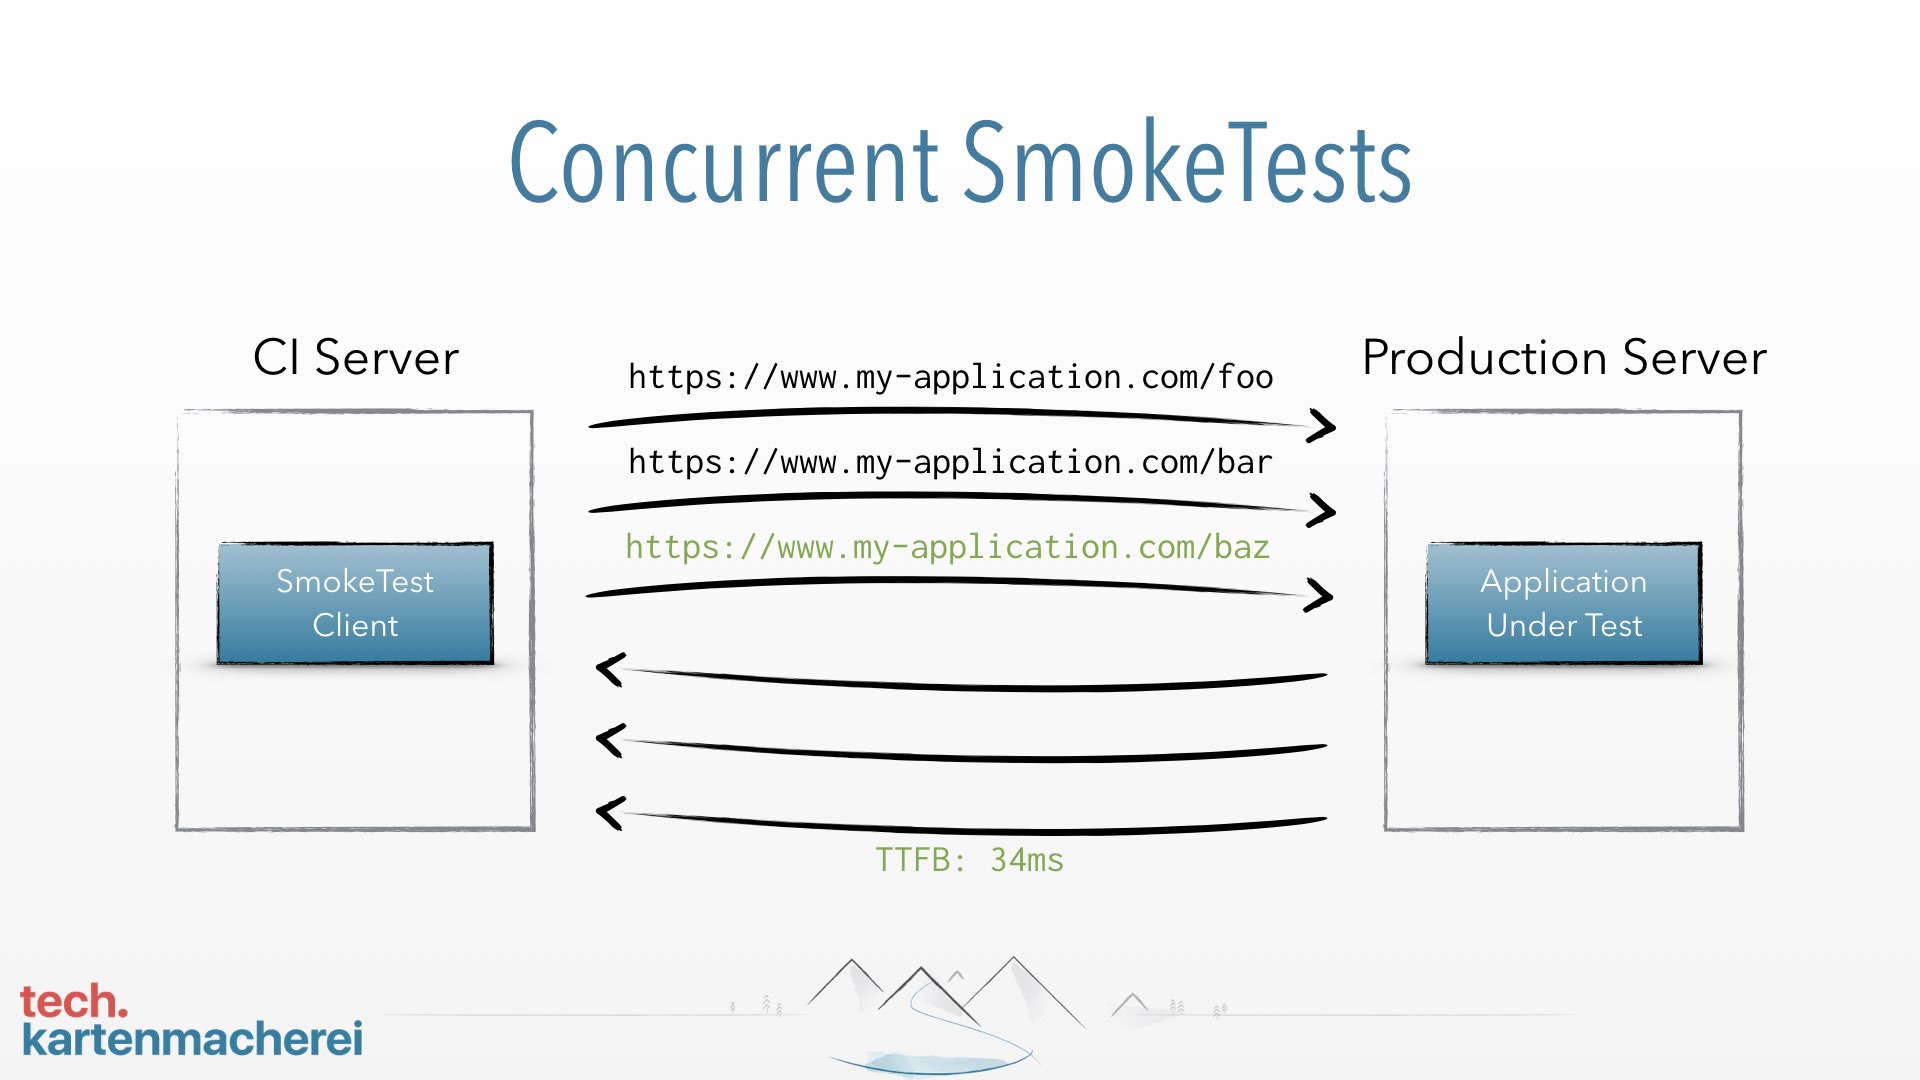 With this slide Sebastian Thoss shows that it would be better to run SmokeTests in parallel